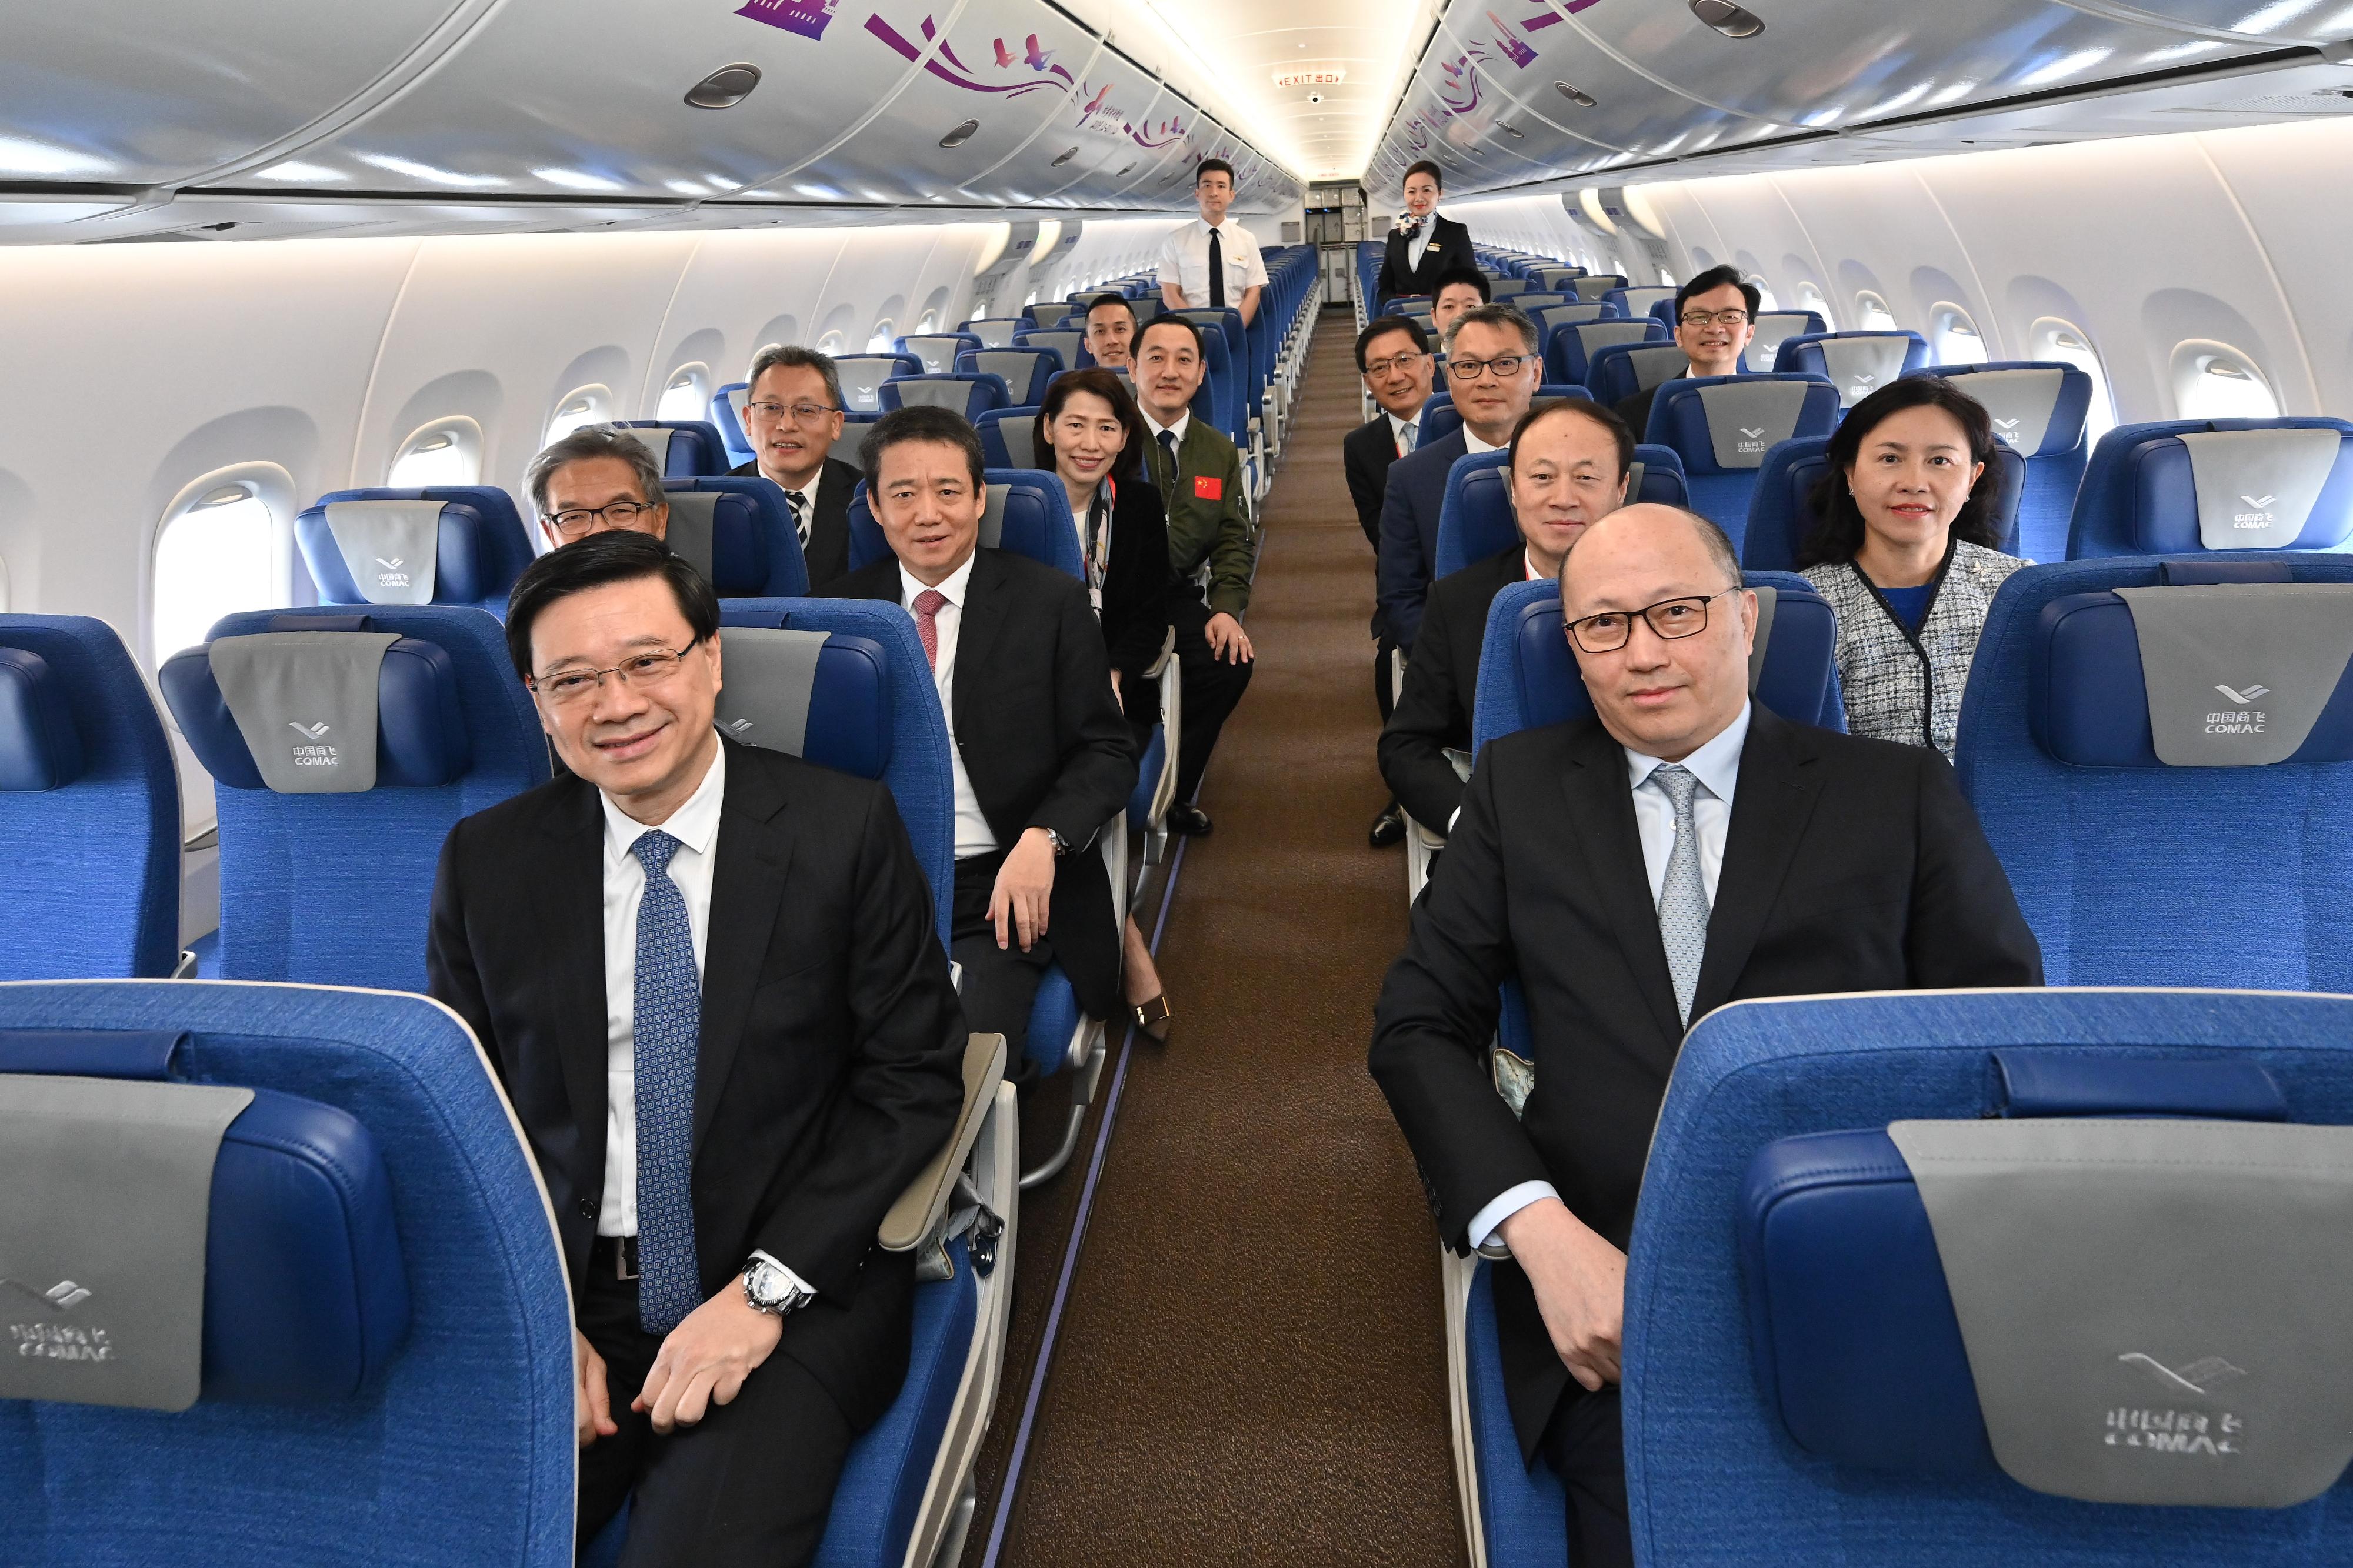 The Chief Executive, Mr John Lee, attended the welcome ceremony for aircraft C919 and ARJ21 today (December 13). Photo shows Mr Lee (first row, left), the Director of the Liaison Office of the Central People's Government in the Hong Kong Special Administrative Region, Mr Zheng Yanxiong (first row, right), and other guests in the economy class cabin of aircraft C919.  
